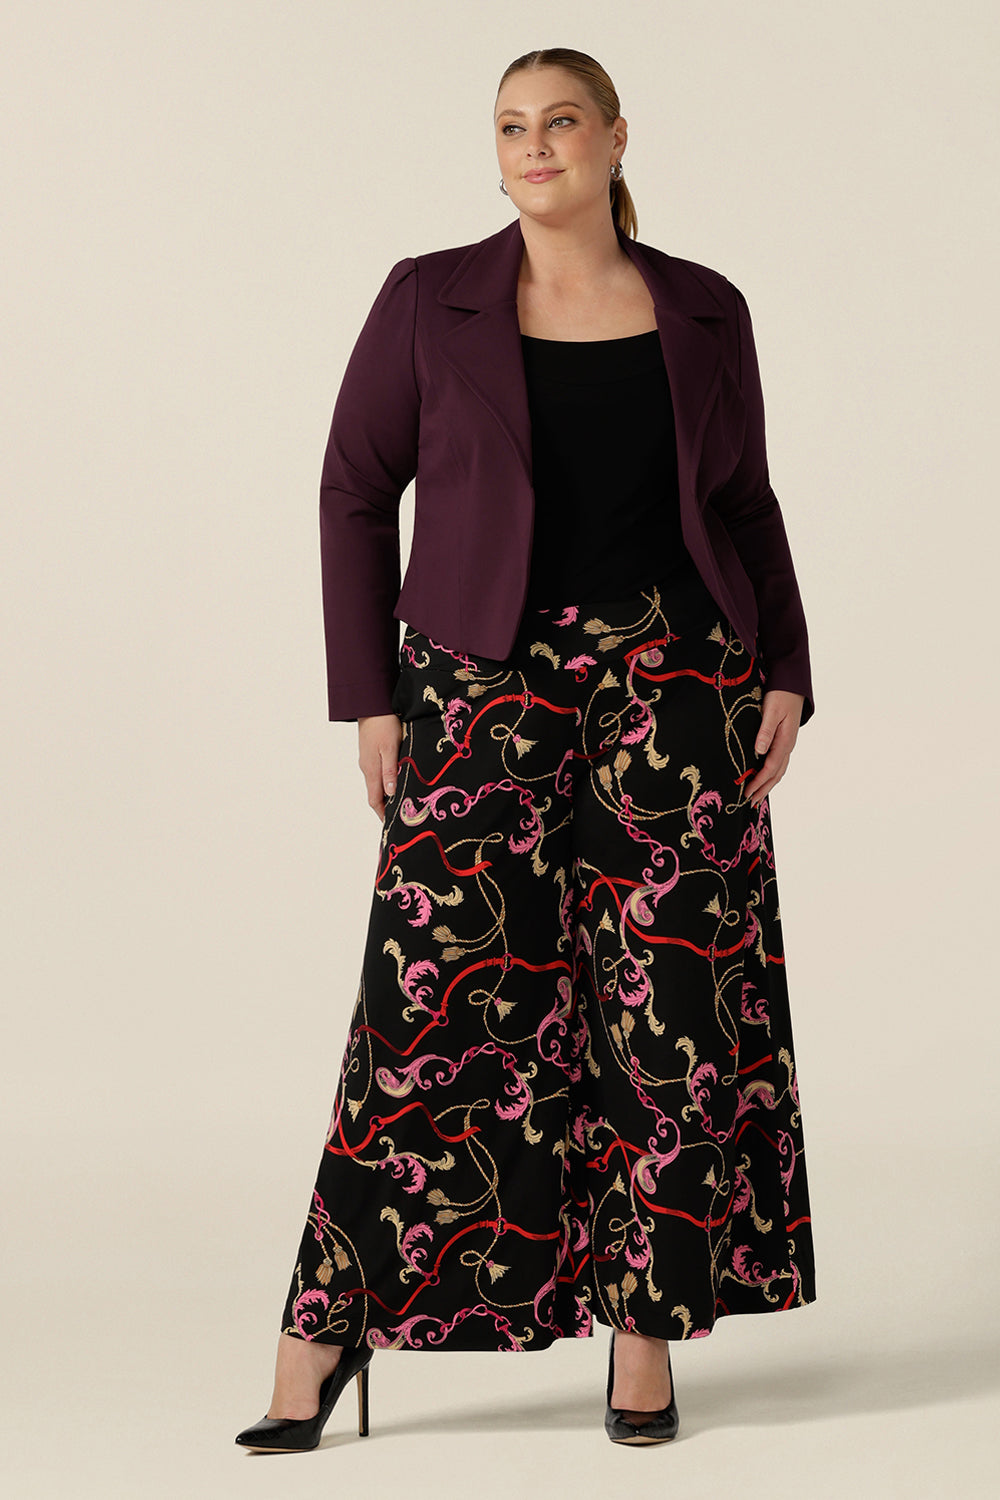 A fuller figure, size 18 woman wears printed wide leg pants with pockets with a square neck black top and tailored work jacket in mulberry red. These pull-on, easy care pants are comfortable for your everyday workwear capsule wardrobe. Shop these Australian-made wide leg trousers online in sizes 8 to 24, petite to plus sizes.